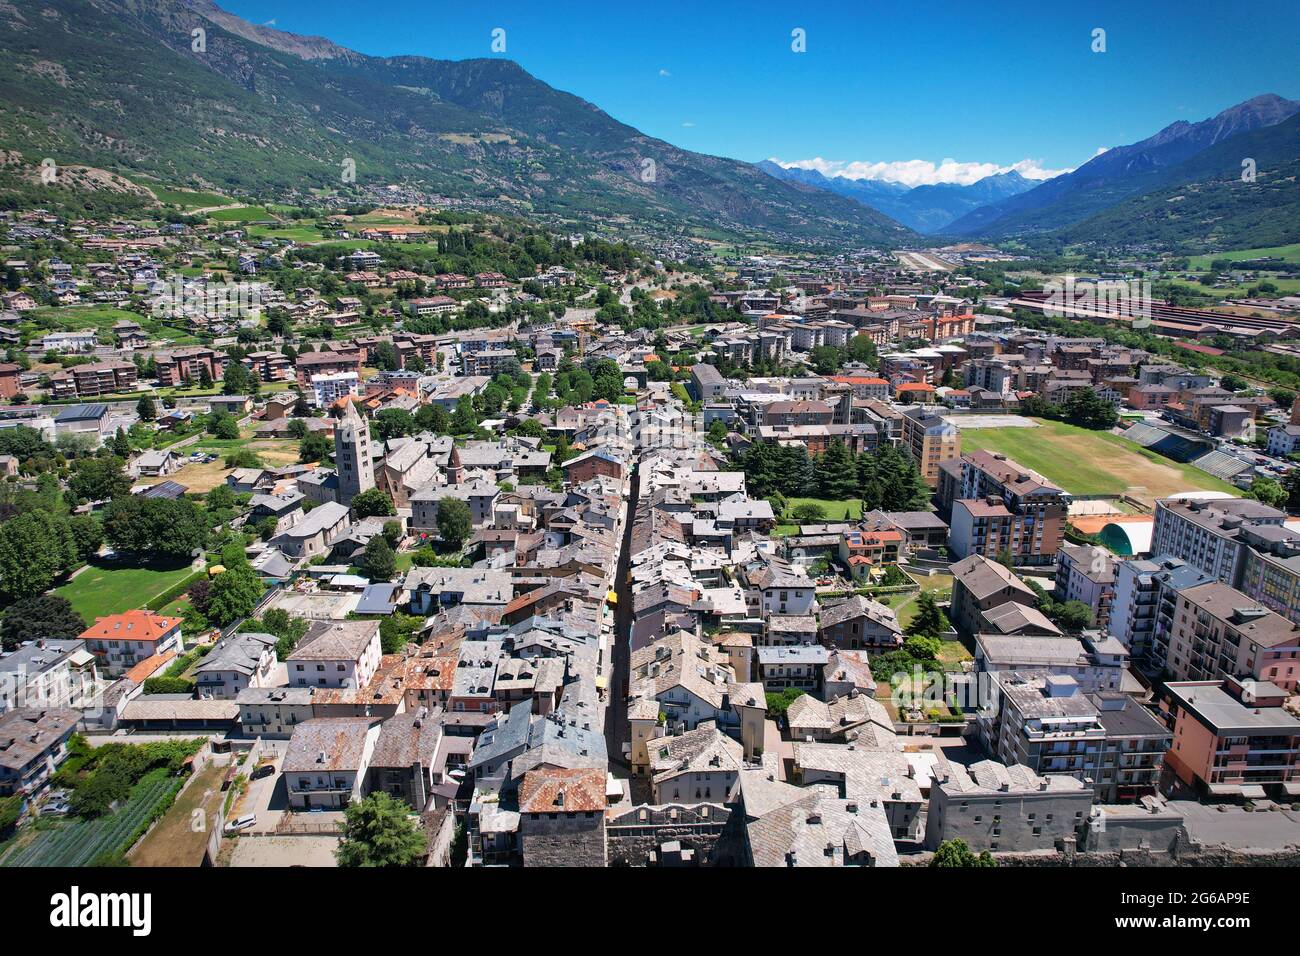 Aerial view of the city center and the main square of Aosta. Italy Stock Photo